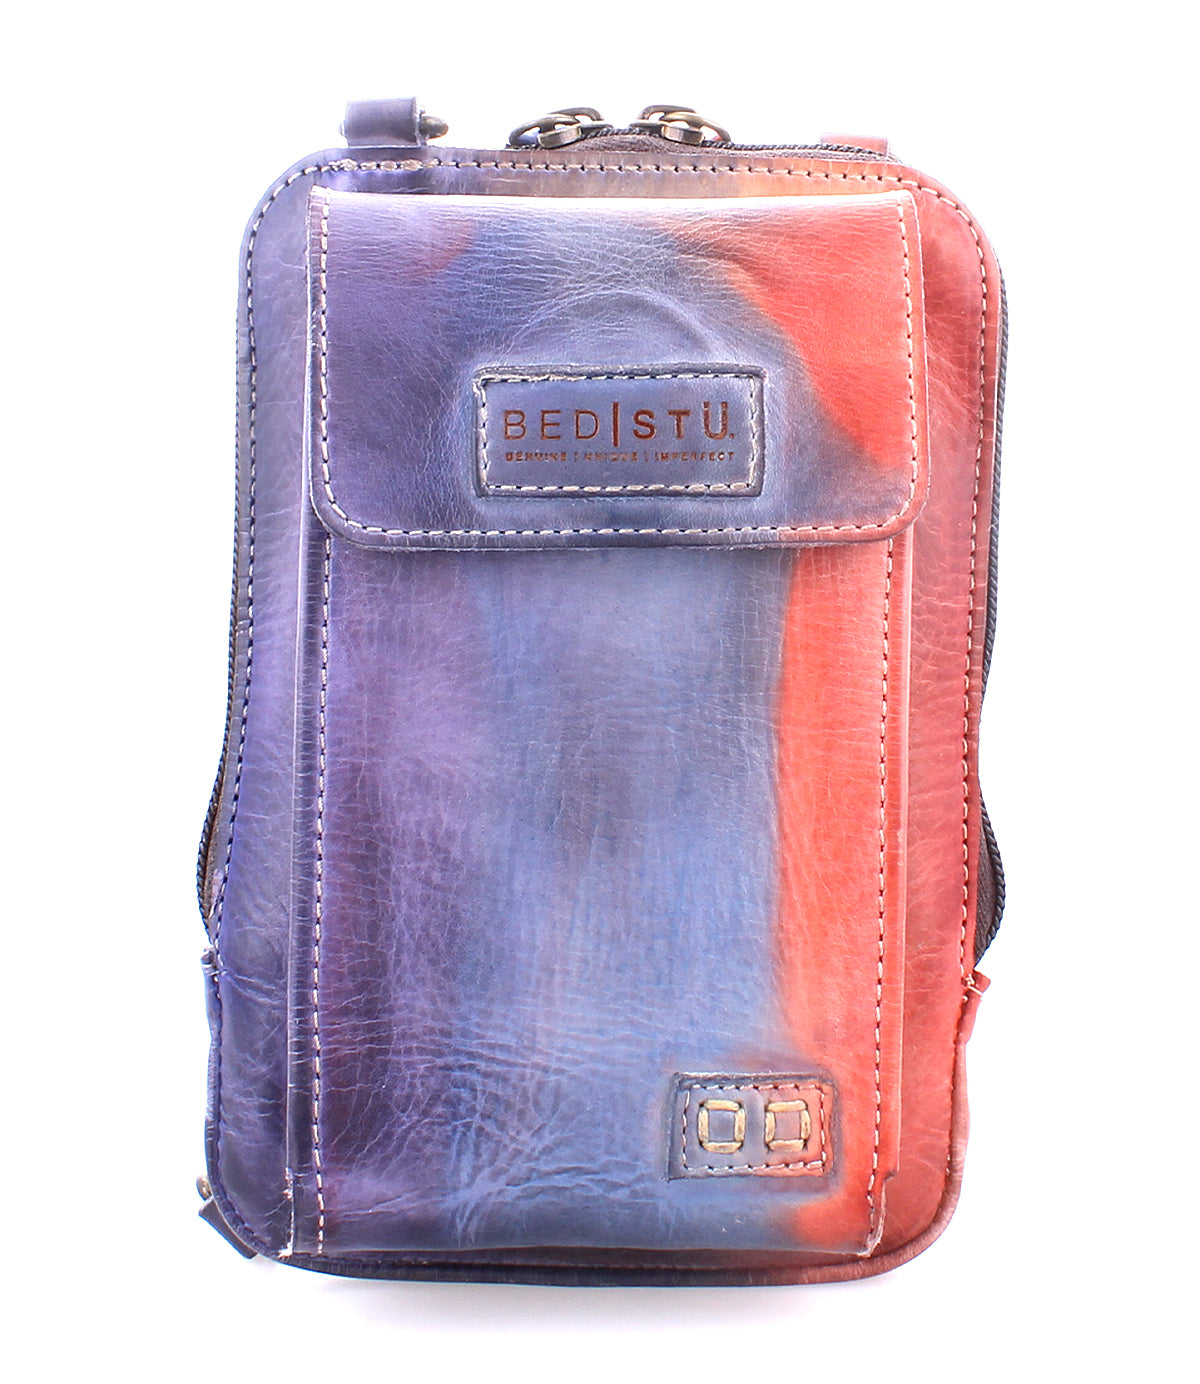 A multicolored premium leather Bed Stu Alelike crossbody phone holder with a vertical, ombre design featuring shades of blue, purple, and orange.